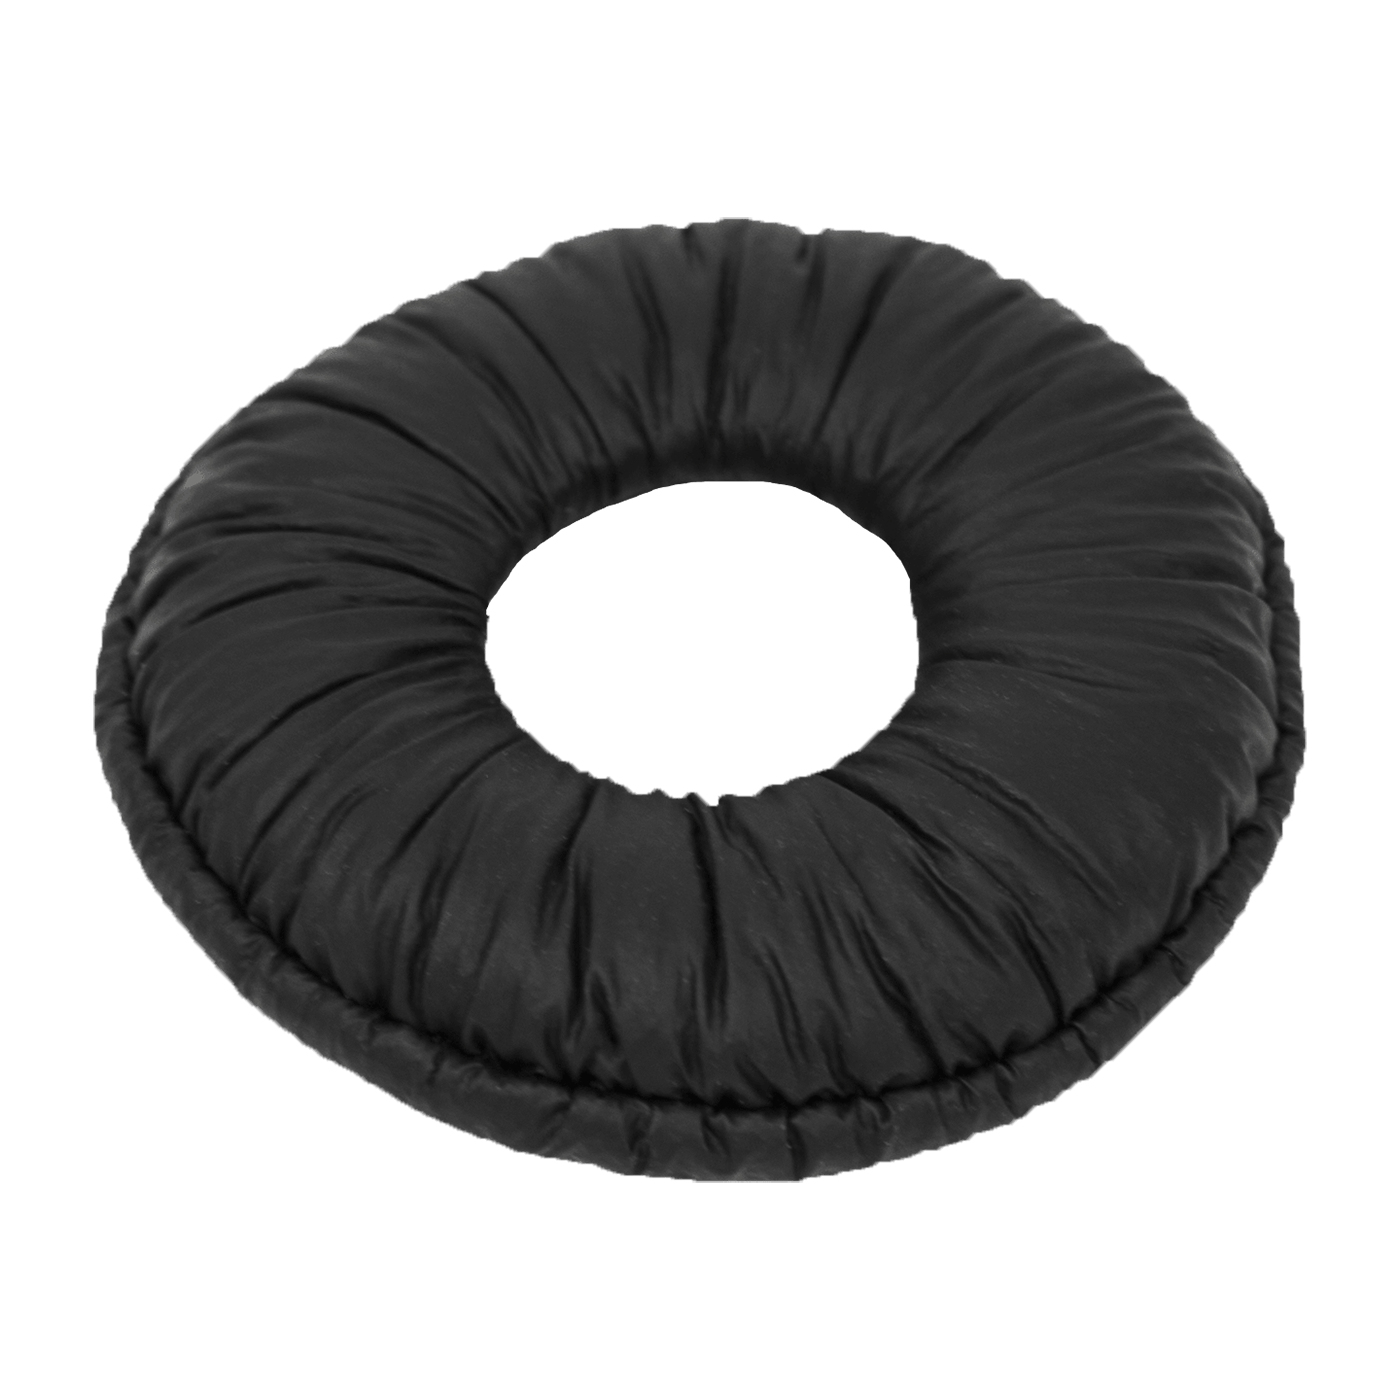 Photos - Other for Computer Jabra Standard Leatherette Cushion 0473-279 